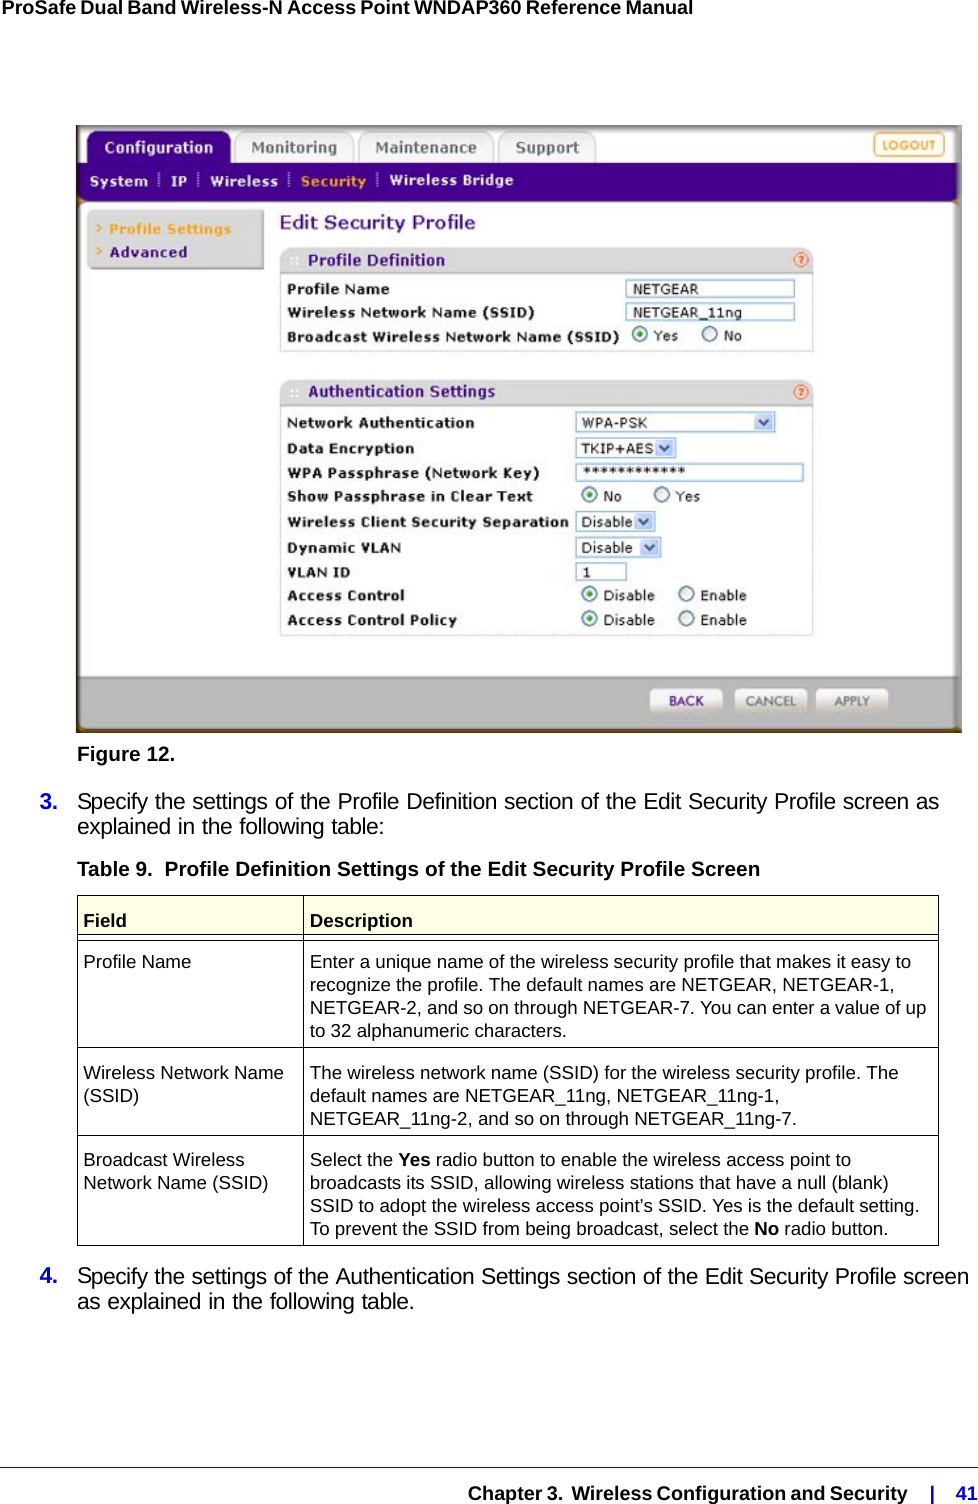   Chapter 3.  Wireless Configuration and Security    |    41ProSafe Dual Band Wireless-N Access Point WNDAP360 Reference Manual Figure 12.  3.  Specify the settings of the Profile Definition section of the Edit Security Profile screen as explained in the following table:4.  Specify the settings of the Authentication Settings section of the Edit Security Profile screen as explained in the following table.Table 9.  Profile Definition Settings of the Edit Security Profile Screen Field  DescriptionProfile Name Enter a unique name of the wireless security profile that makes it easy to recognize the profile. The default names are NETGEAR, NETGEAR-1, NETGEAR-2, and so on through NETGEAR-7. You can enter a value of up to 32 alphanumeric characters. Wireless Network Name (SSID) The wireless network name (SSID) for the wireless security profile. The default names are NETGEAR_11ng, NETGEAR_11ng-1, NETGEAR_11ng-2, and so on through NETGEAR_11ng-7. Broadcast Wireless Network Name (SSID) Select the Yes radio button to enable the wireless access point to broadcasts its SSID, allowing wireless stations that have a null (blank) SSID to adopt the wireless access point’s SSID. Yes is the default setting. To prevent the SSID from being broadcast, select the No radio button.